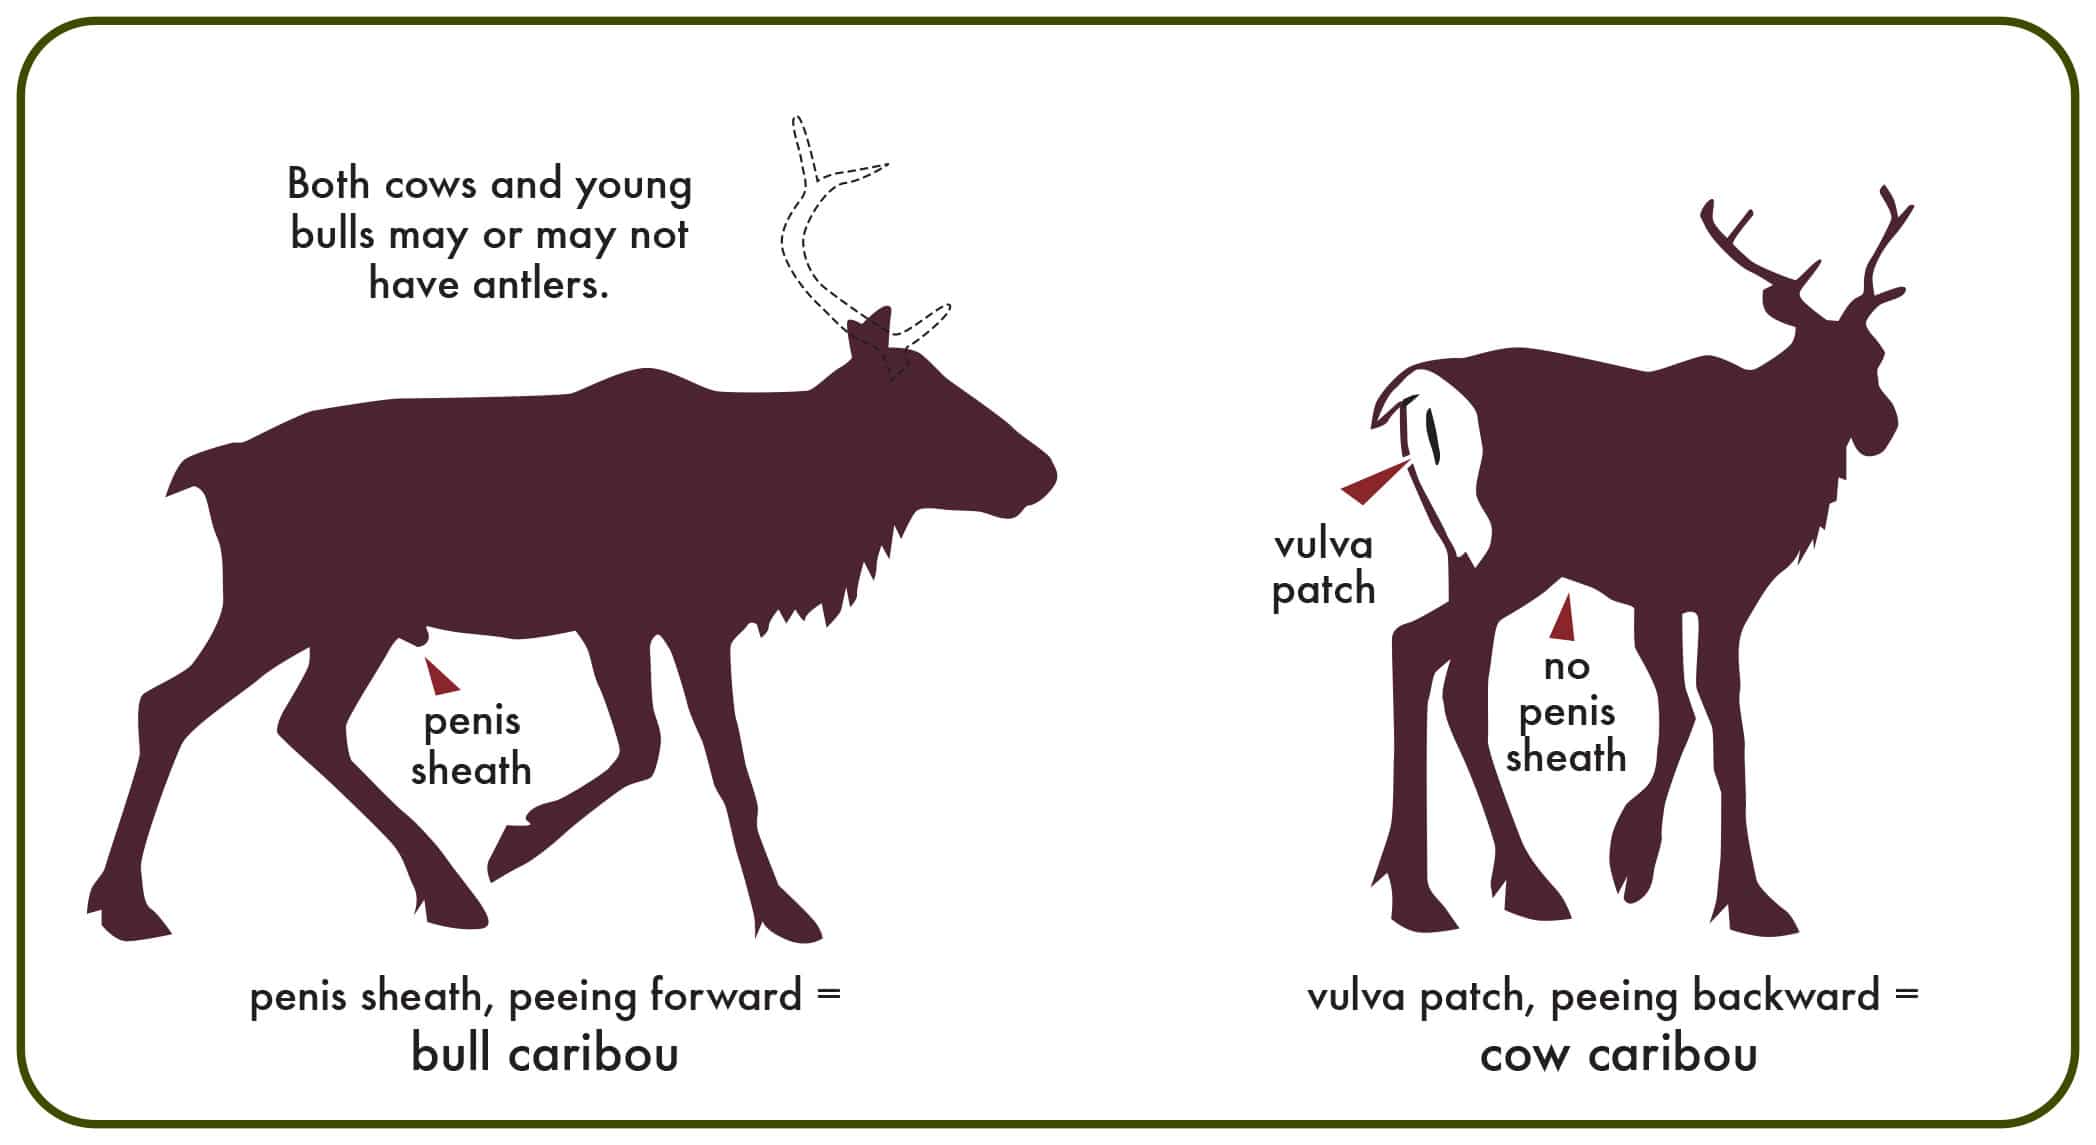 Cows vs Bulls - Can you tell the difference?